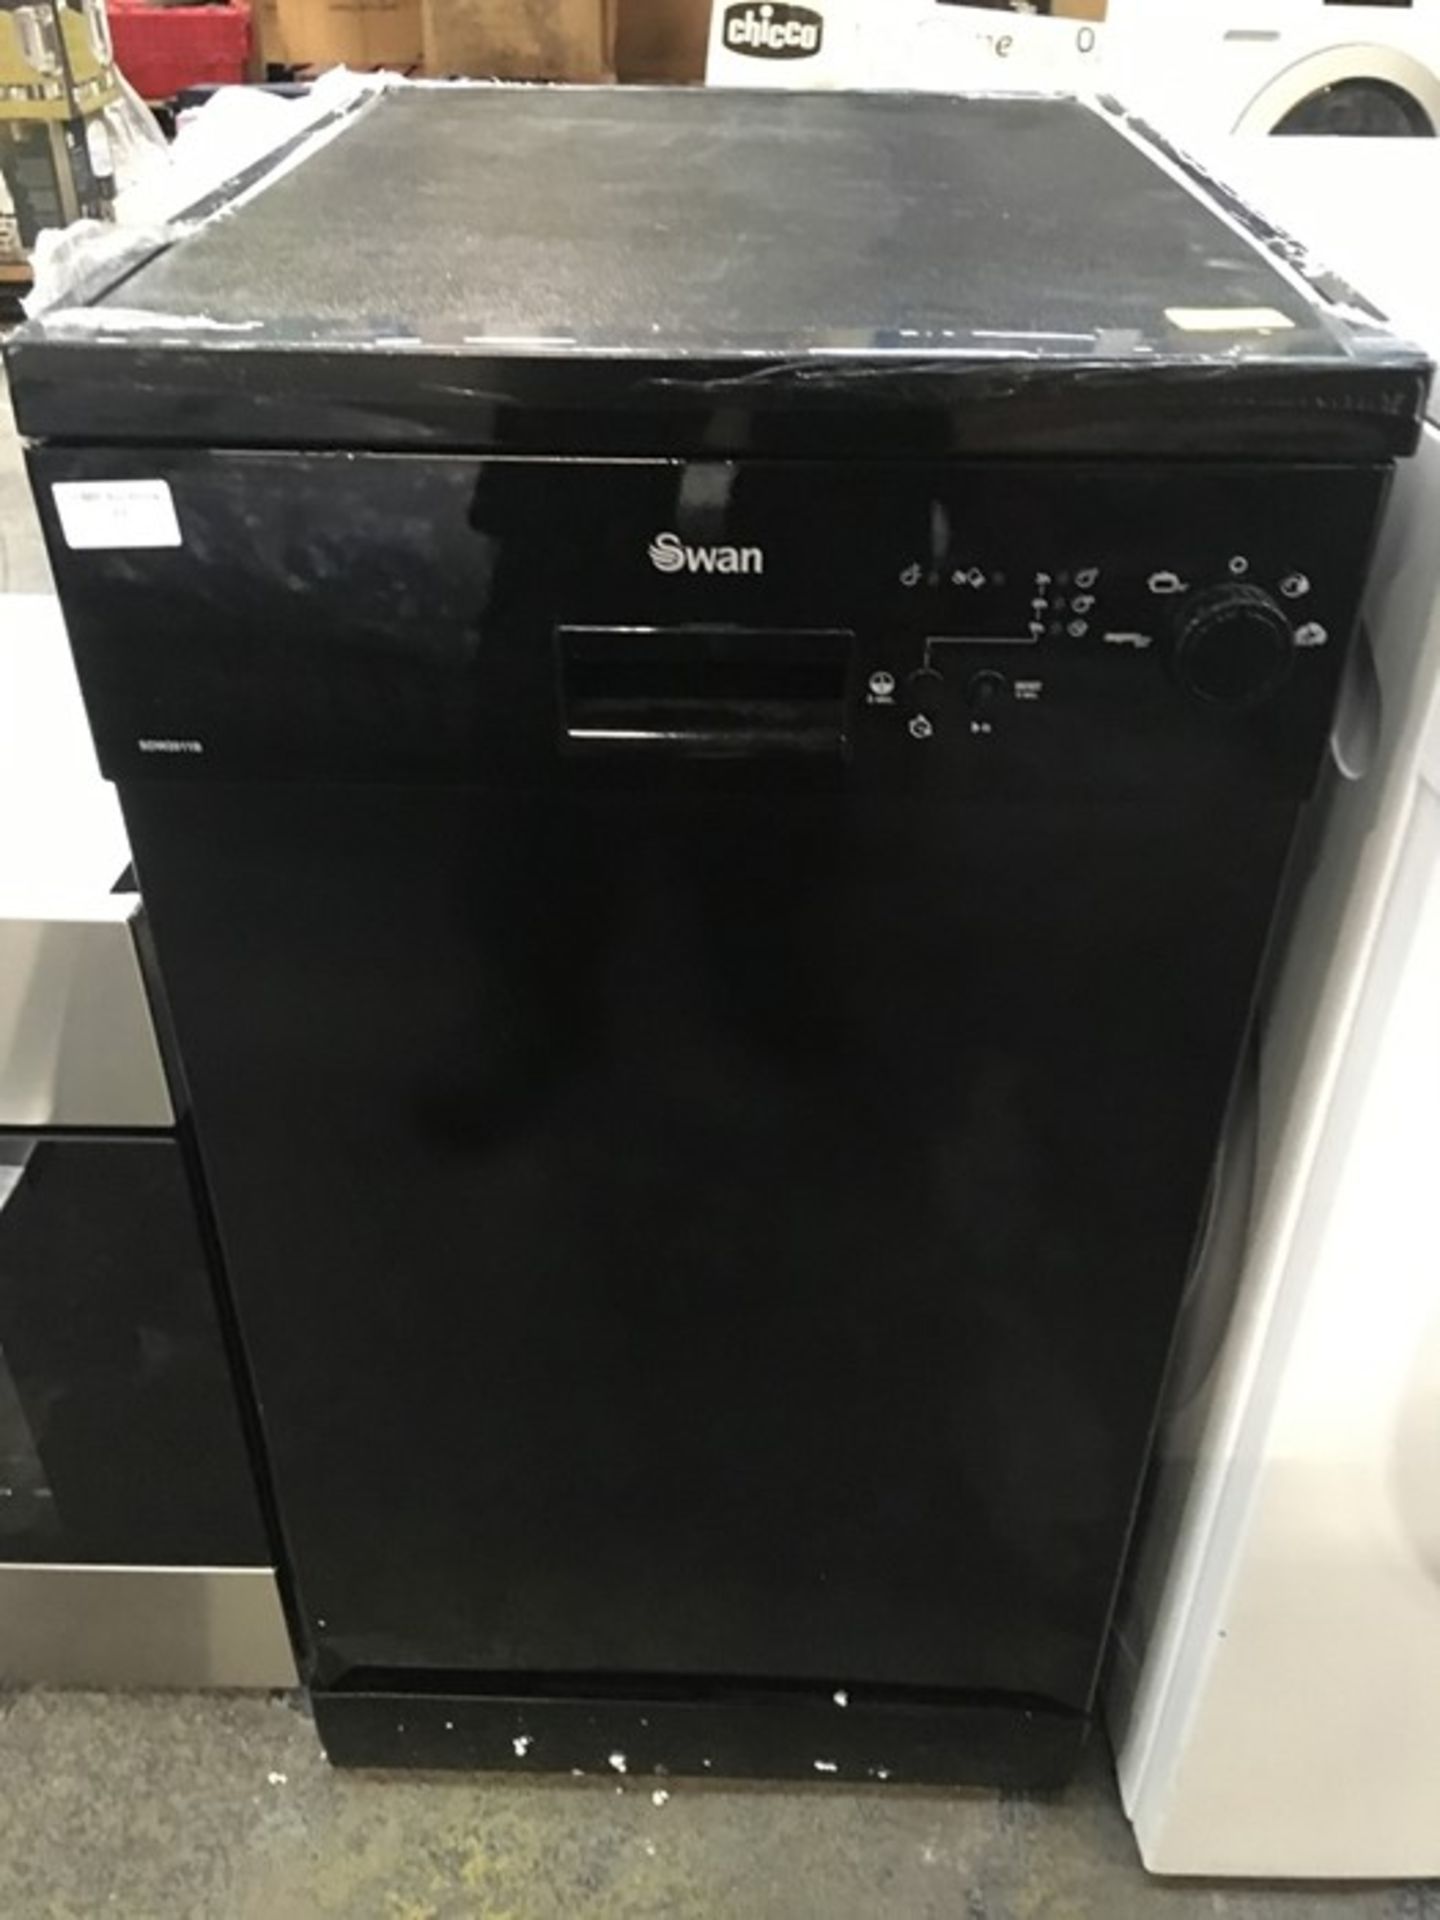 1 SWAN SDW2011B SLIMLINE DISHWASHER IN BLACK / RRP £199.99 (PUBLIC VIEWING AVAILABLE)